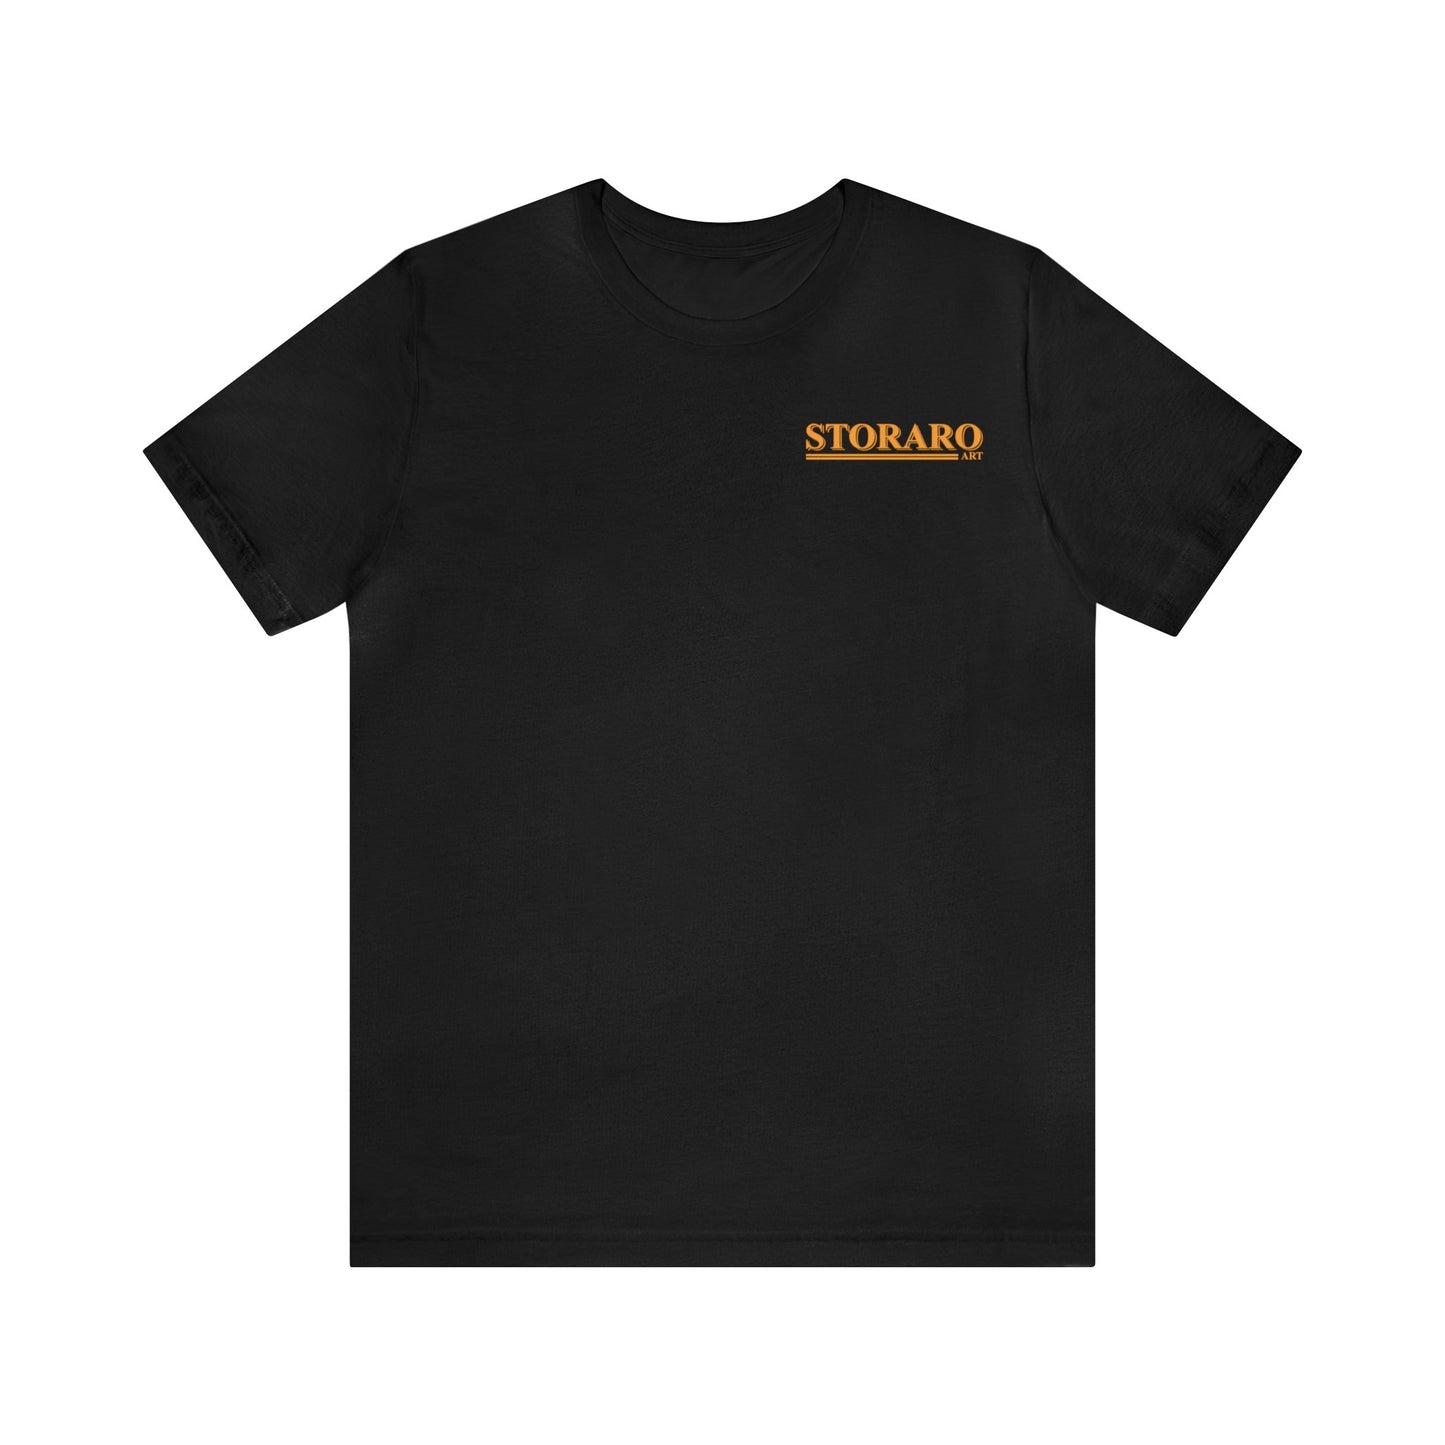 The Celsius Library Tee Shirt